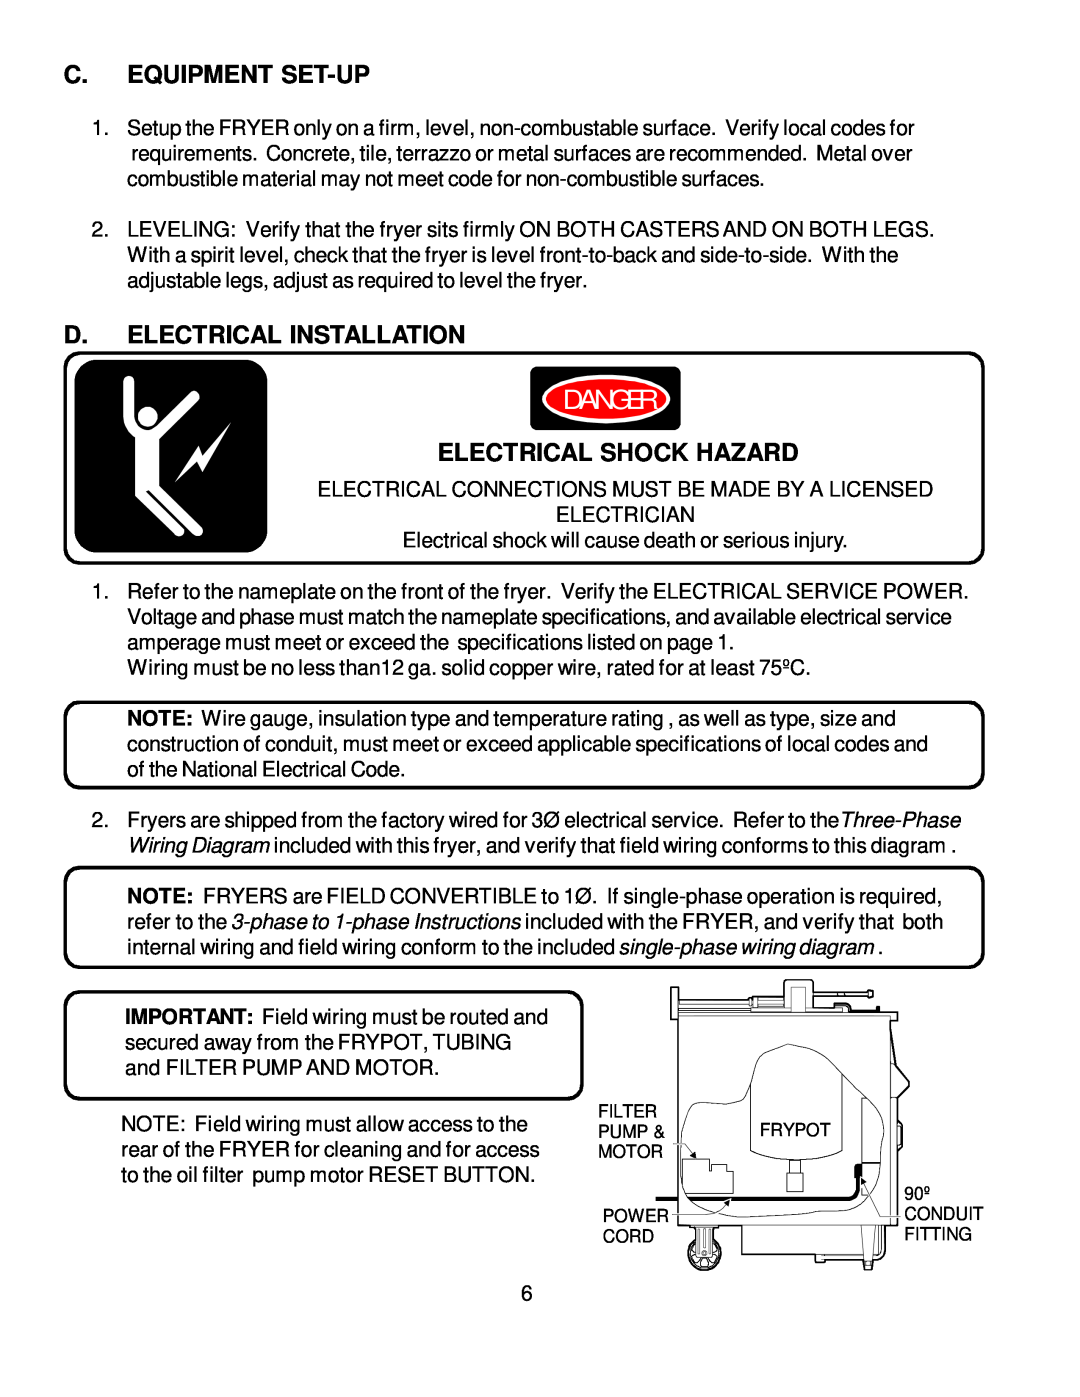 Bloomfield WFPE-30F manual Danger, C. Equipment Set-Up, D. Electrical Installation, Electrical Shock Hazard 